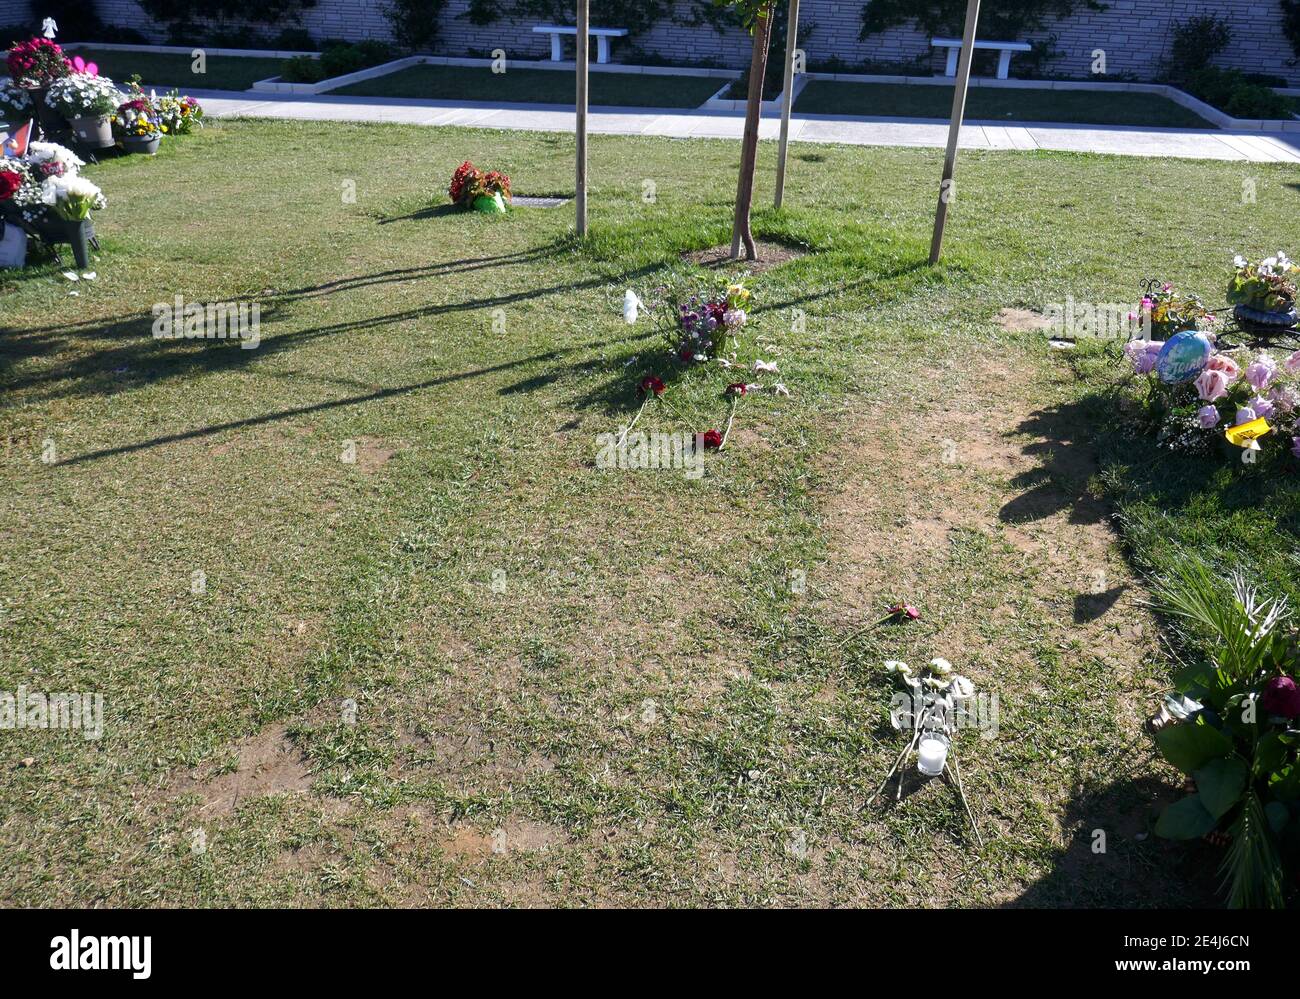 Los Angeles, California, USA 21st January 2021 A general view of atmosphere of Rapper Nipsey Hussle's Grave (unmarked) at Forest Lawn Memorial Park Hollywood Hills on January 21, 2021 in Los Angeles, California, USA. Photo by Barry King/Alamy Stock Photo Stock Photo